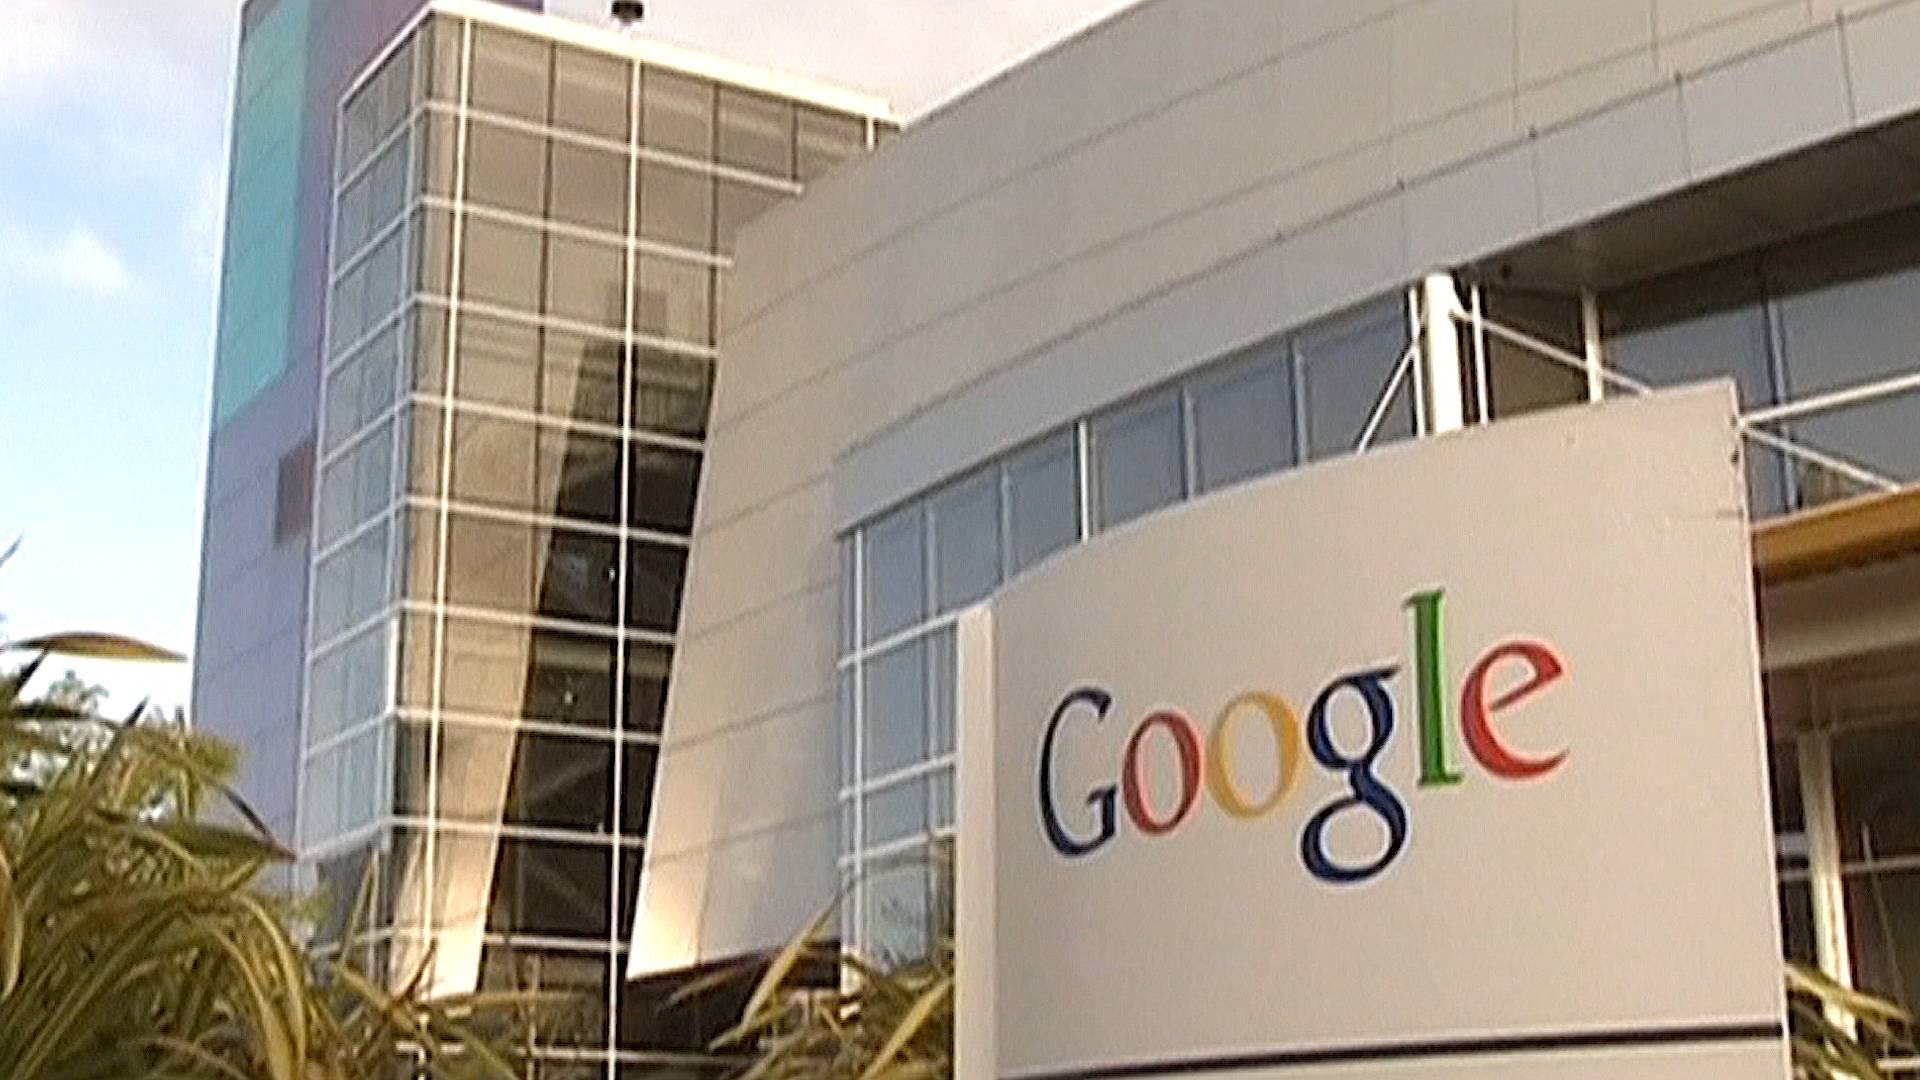 Google to Pay $118 Million to Employees in Gender Discrimination Suit